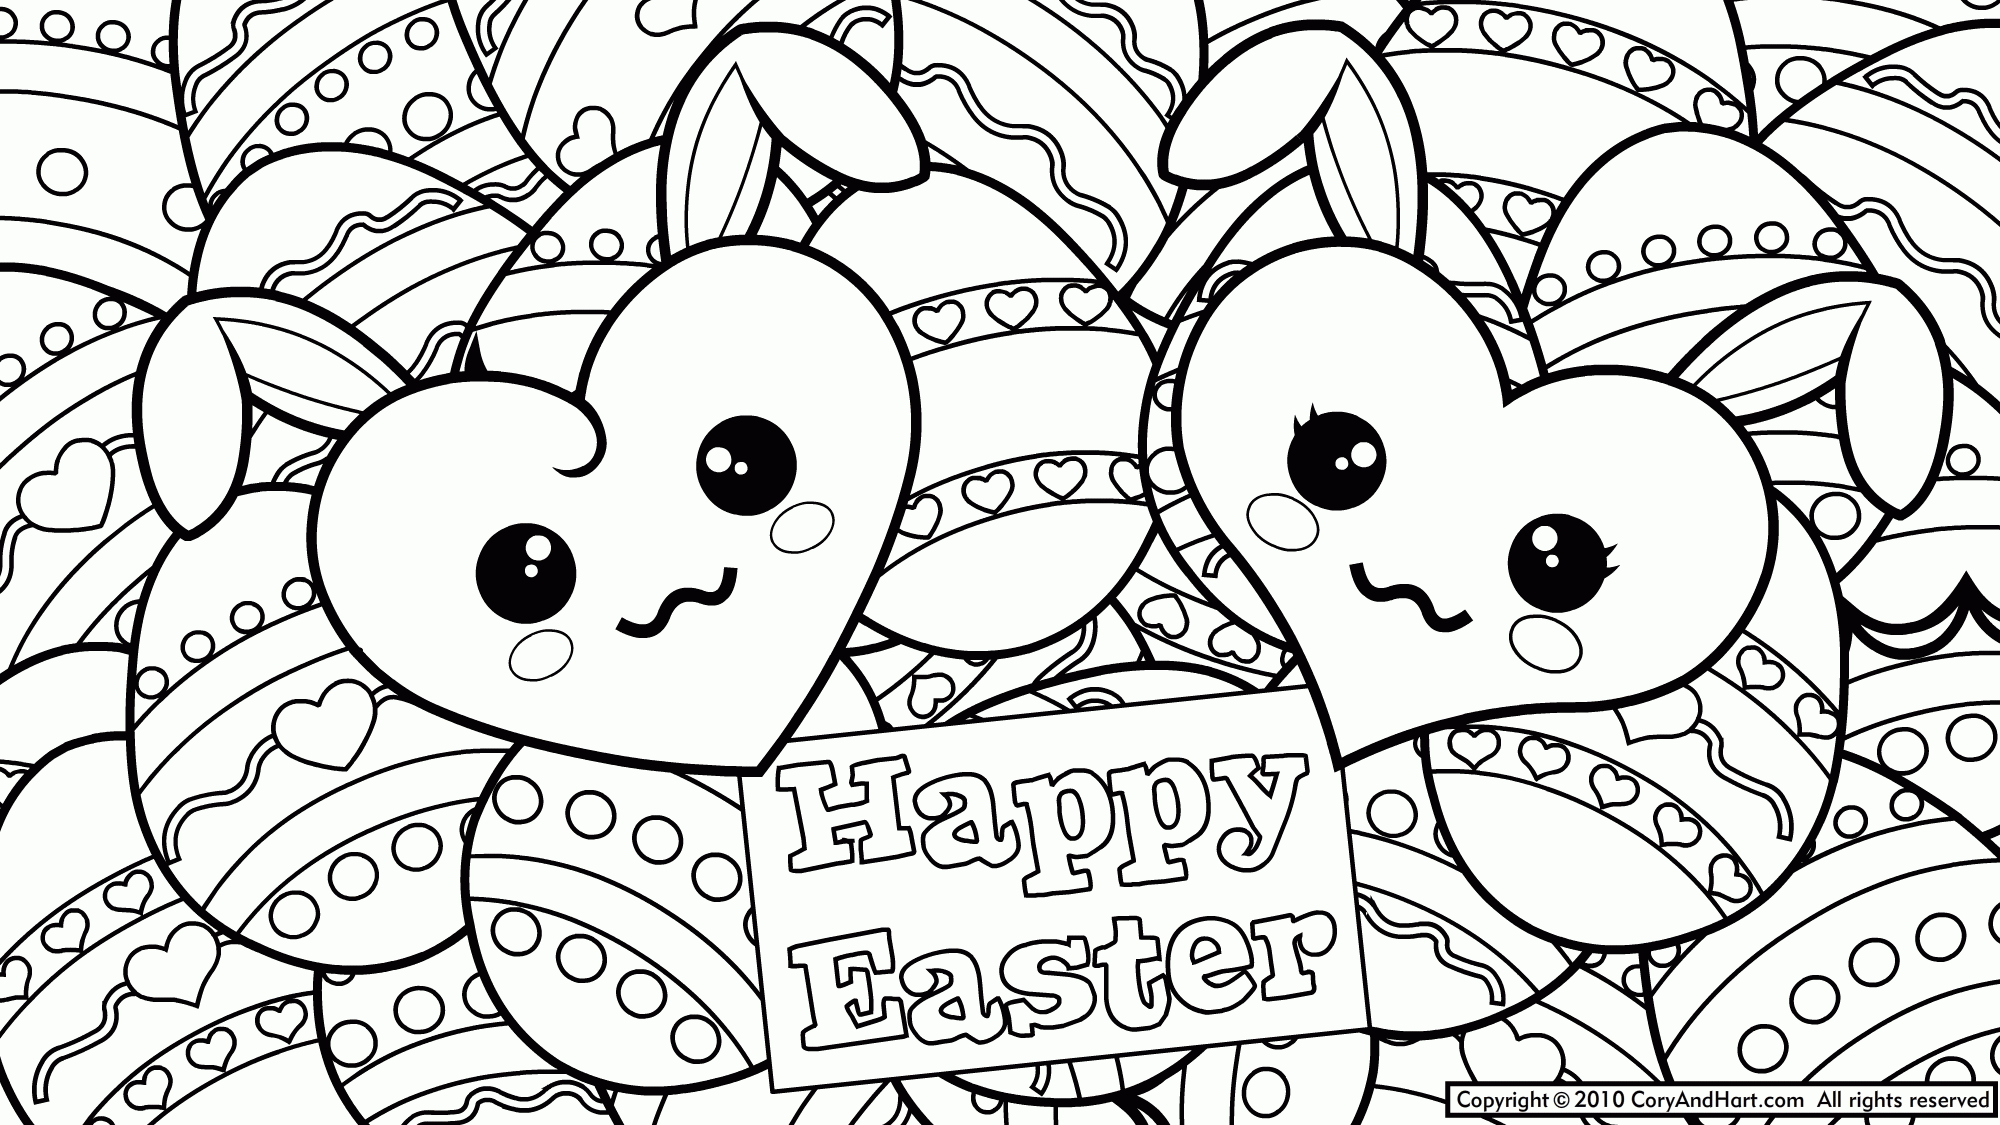 Easter Coloring Pages Pdf Home Intellect Resume Format Download Widetheme